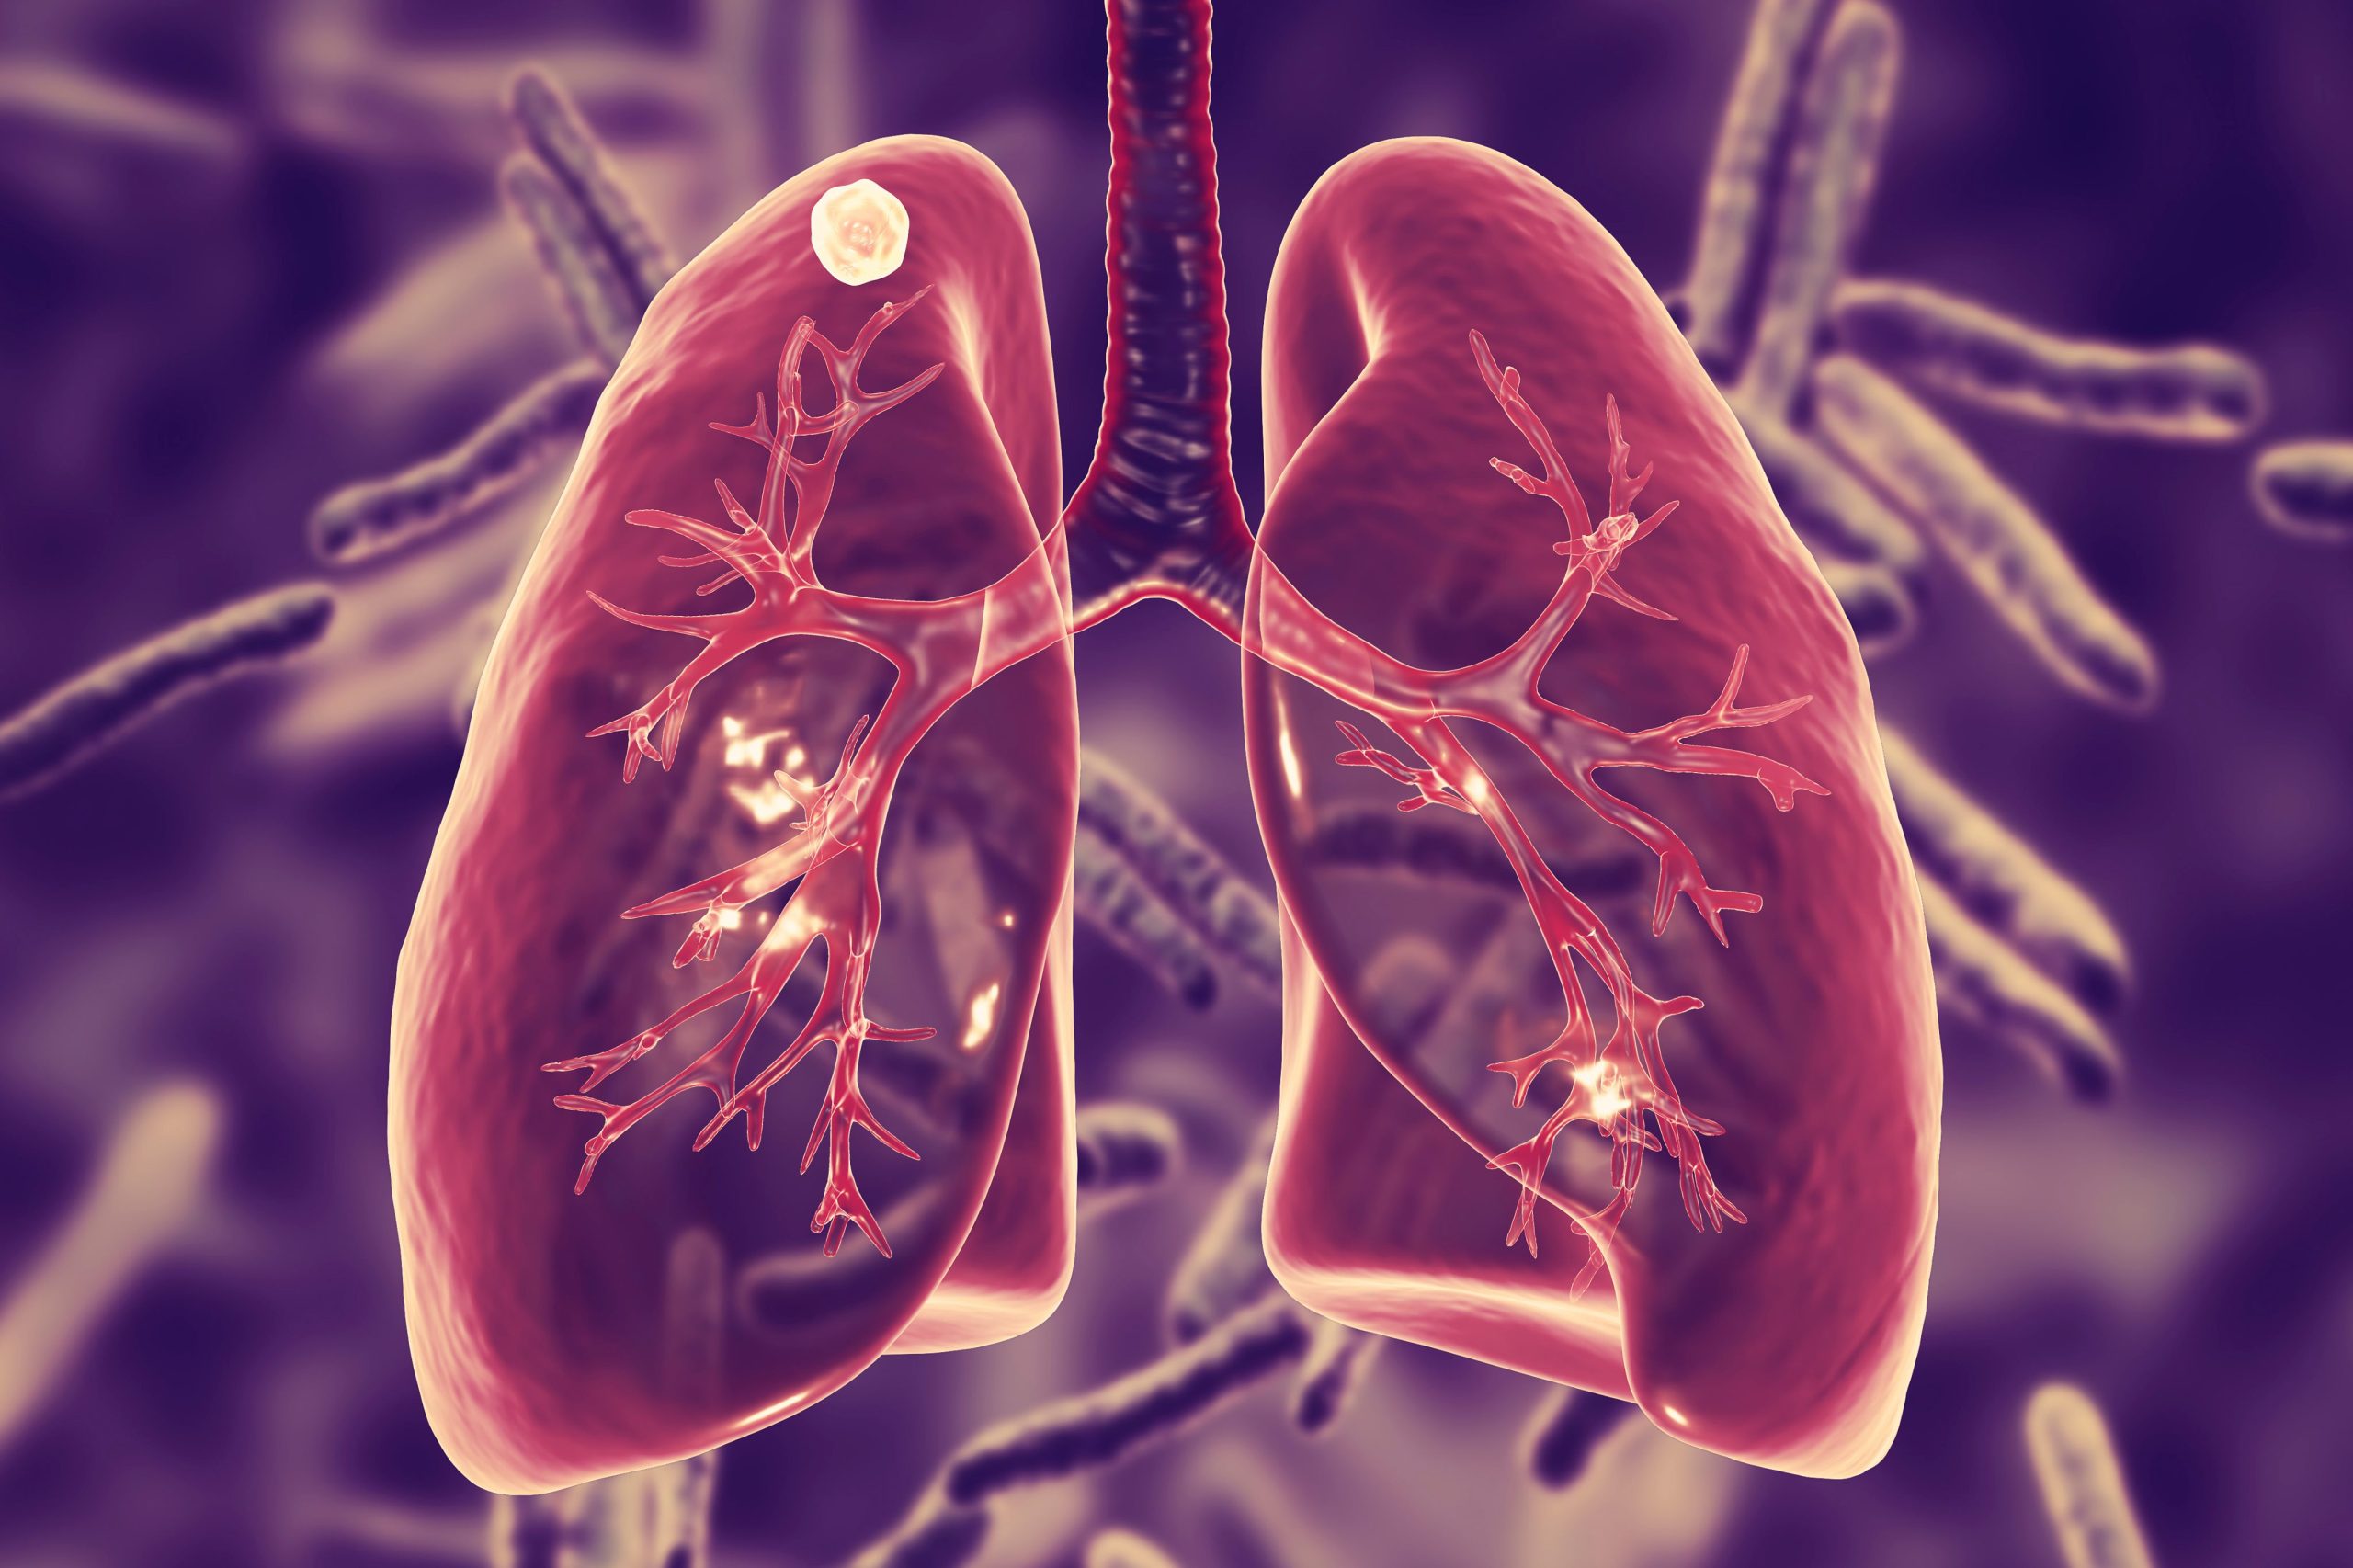 Compliance to the treatment can cure Tuberculosis